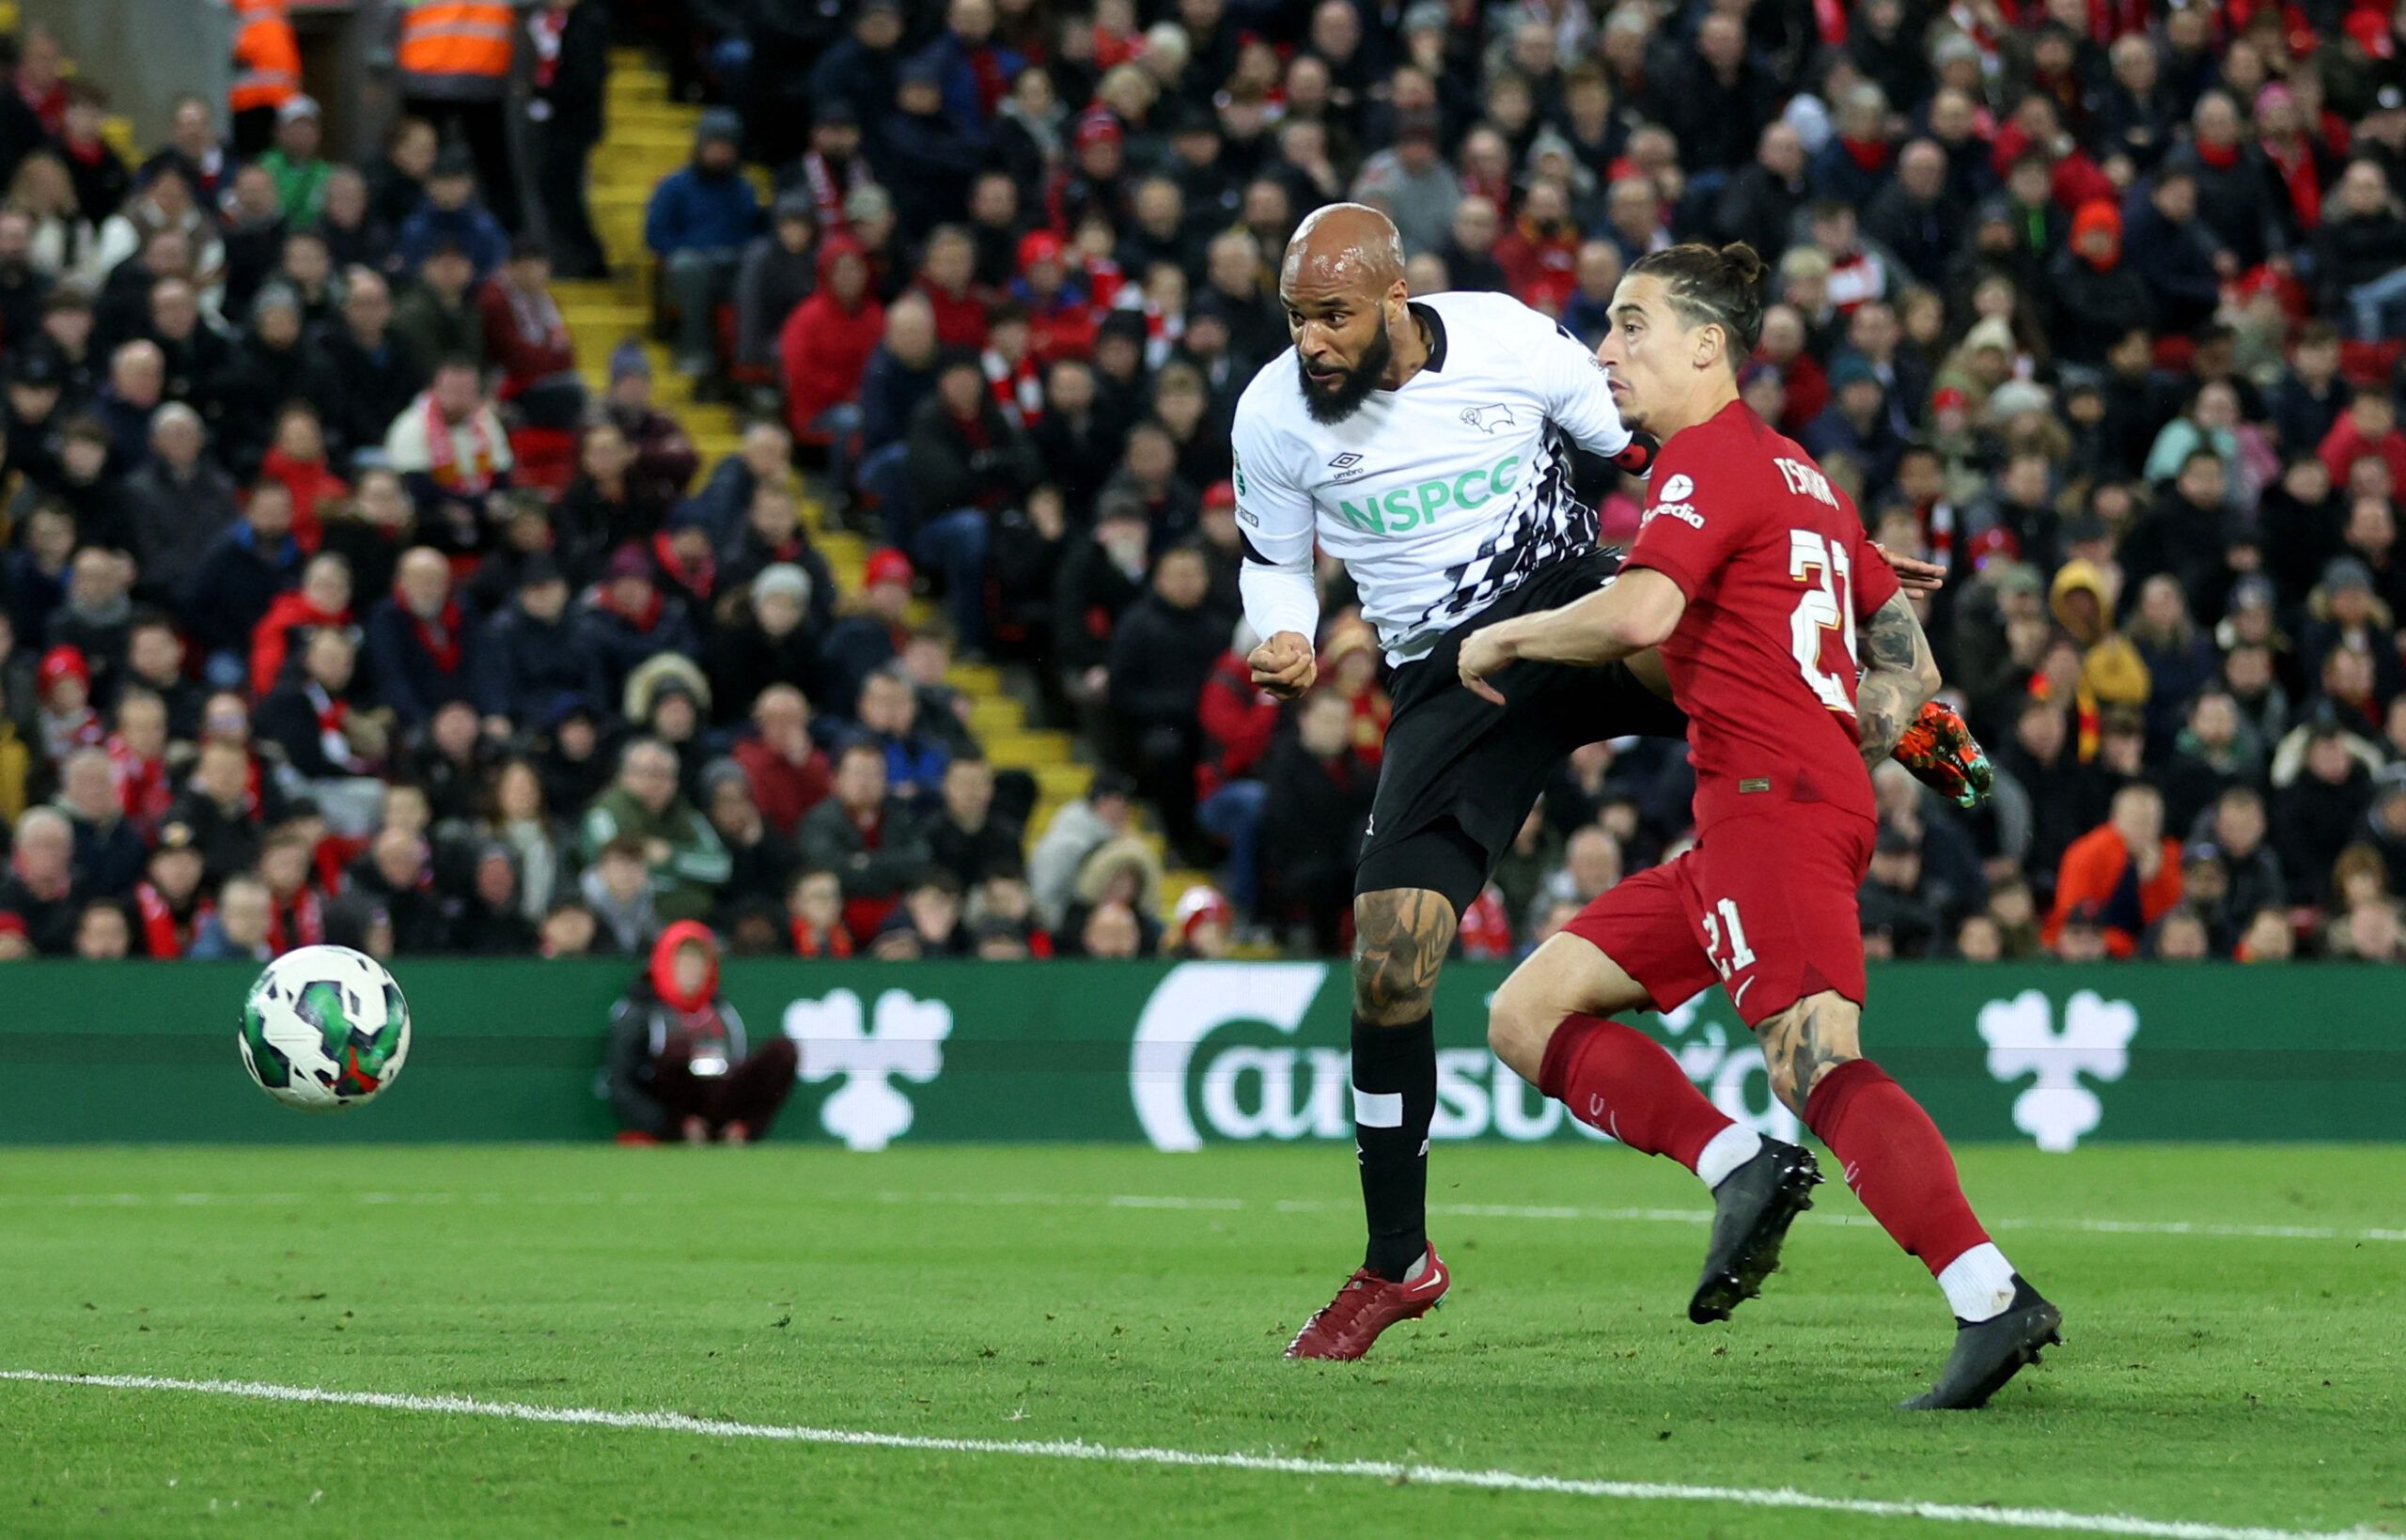 Soccer Football - Carabao Cup Third Round - Liverpool v Derby County - Anfield, Liverpool, Britain - November 9, 2022 Derby County's David McGoldrick in action with Liverpool's Kostas Tsimikas REUTERS/Carl Recine EDITORIAL USE ONLY. No use with unauthorized audio, video, data, fixture lists, club/league logos or 'live' services. Online in-match use limited to 75 images, no video emulation. No use in betting, games or single club /league/player publications.  Please contact your account represent